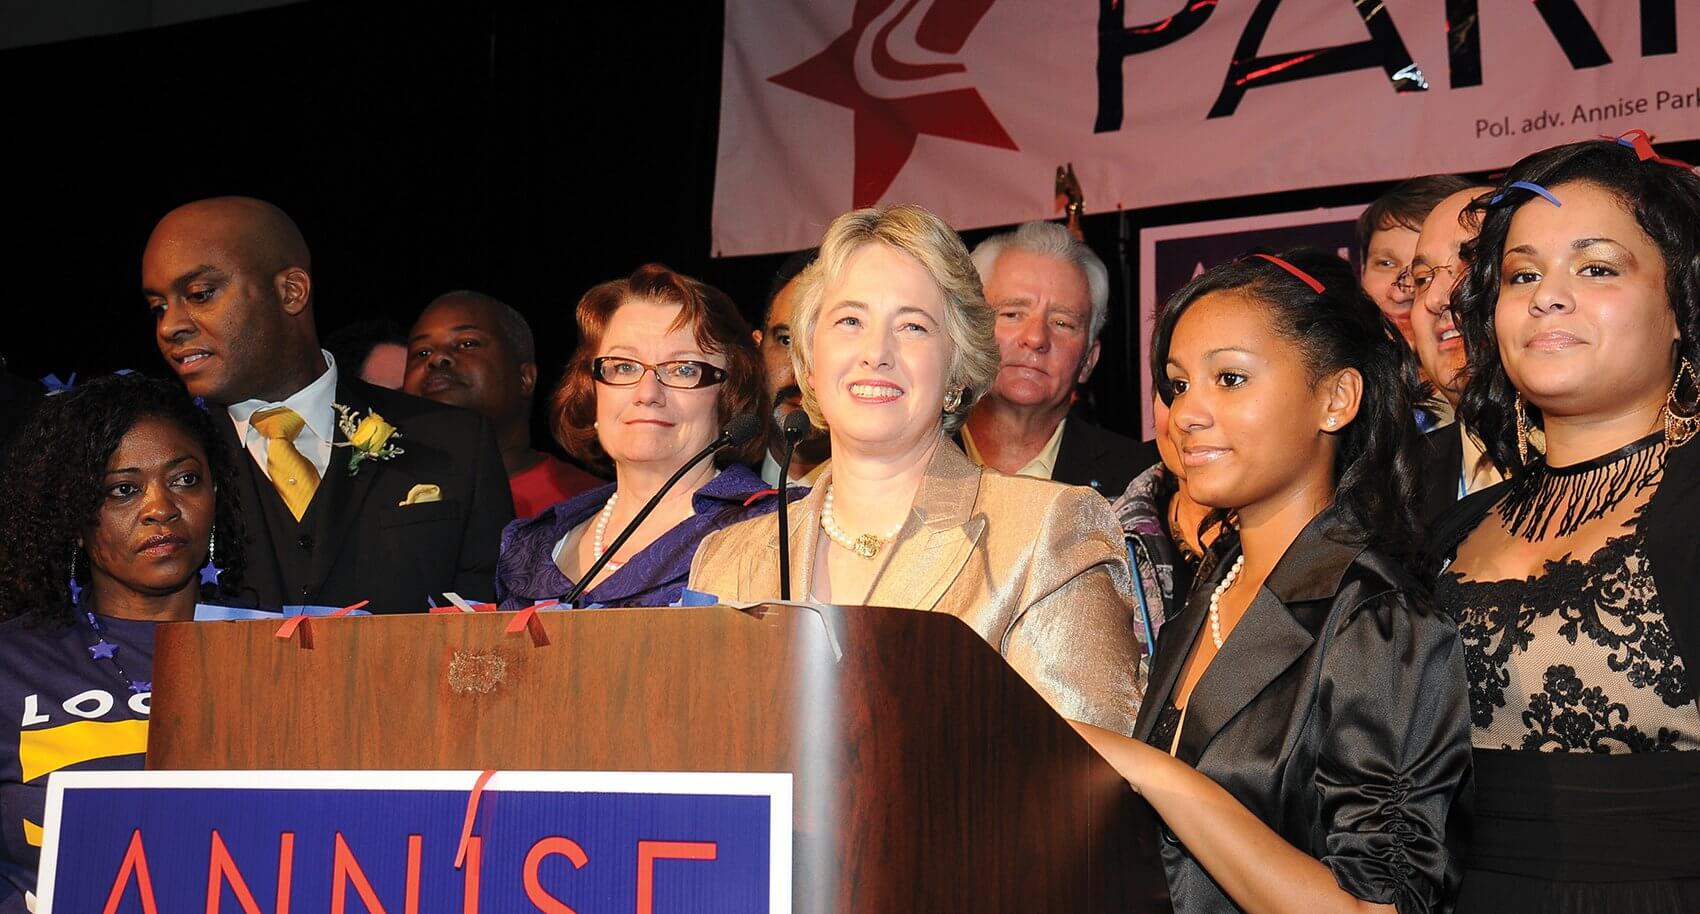 Houston Mayor Annise Parker pictured with her family on election night in 2009. (Credit: Office of the Mayor, Houston, Texas)